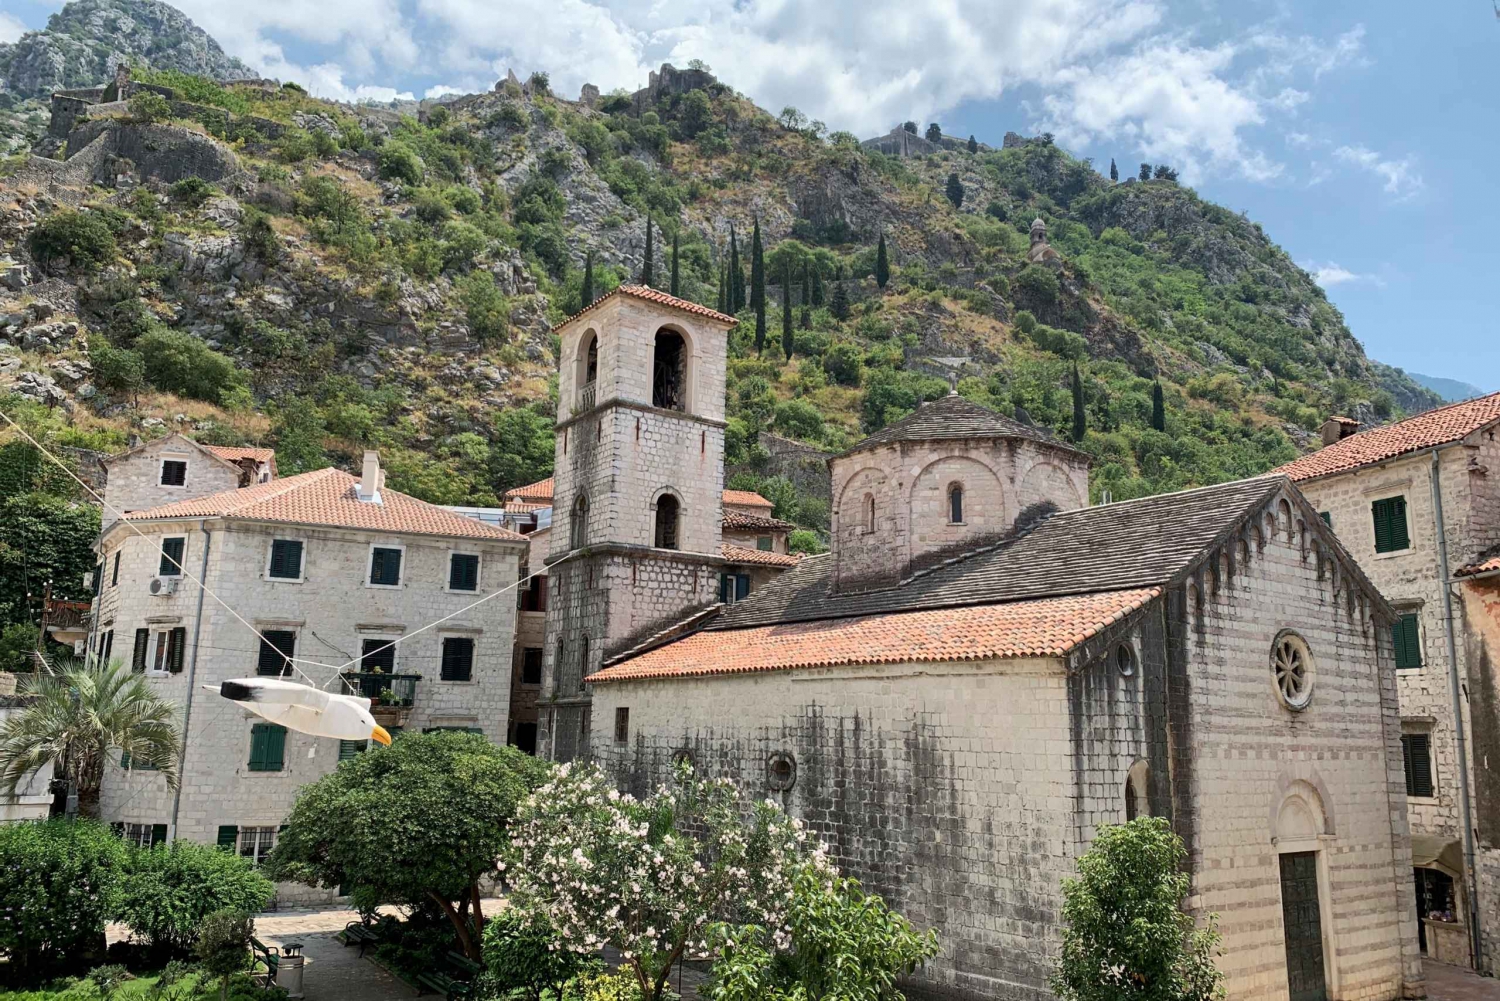 Kotor: Self-guided Discovery Walk of the Old Town